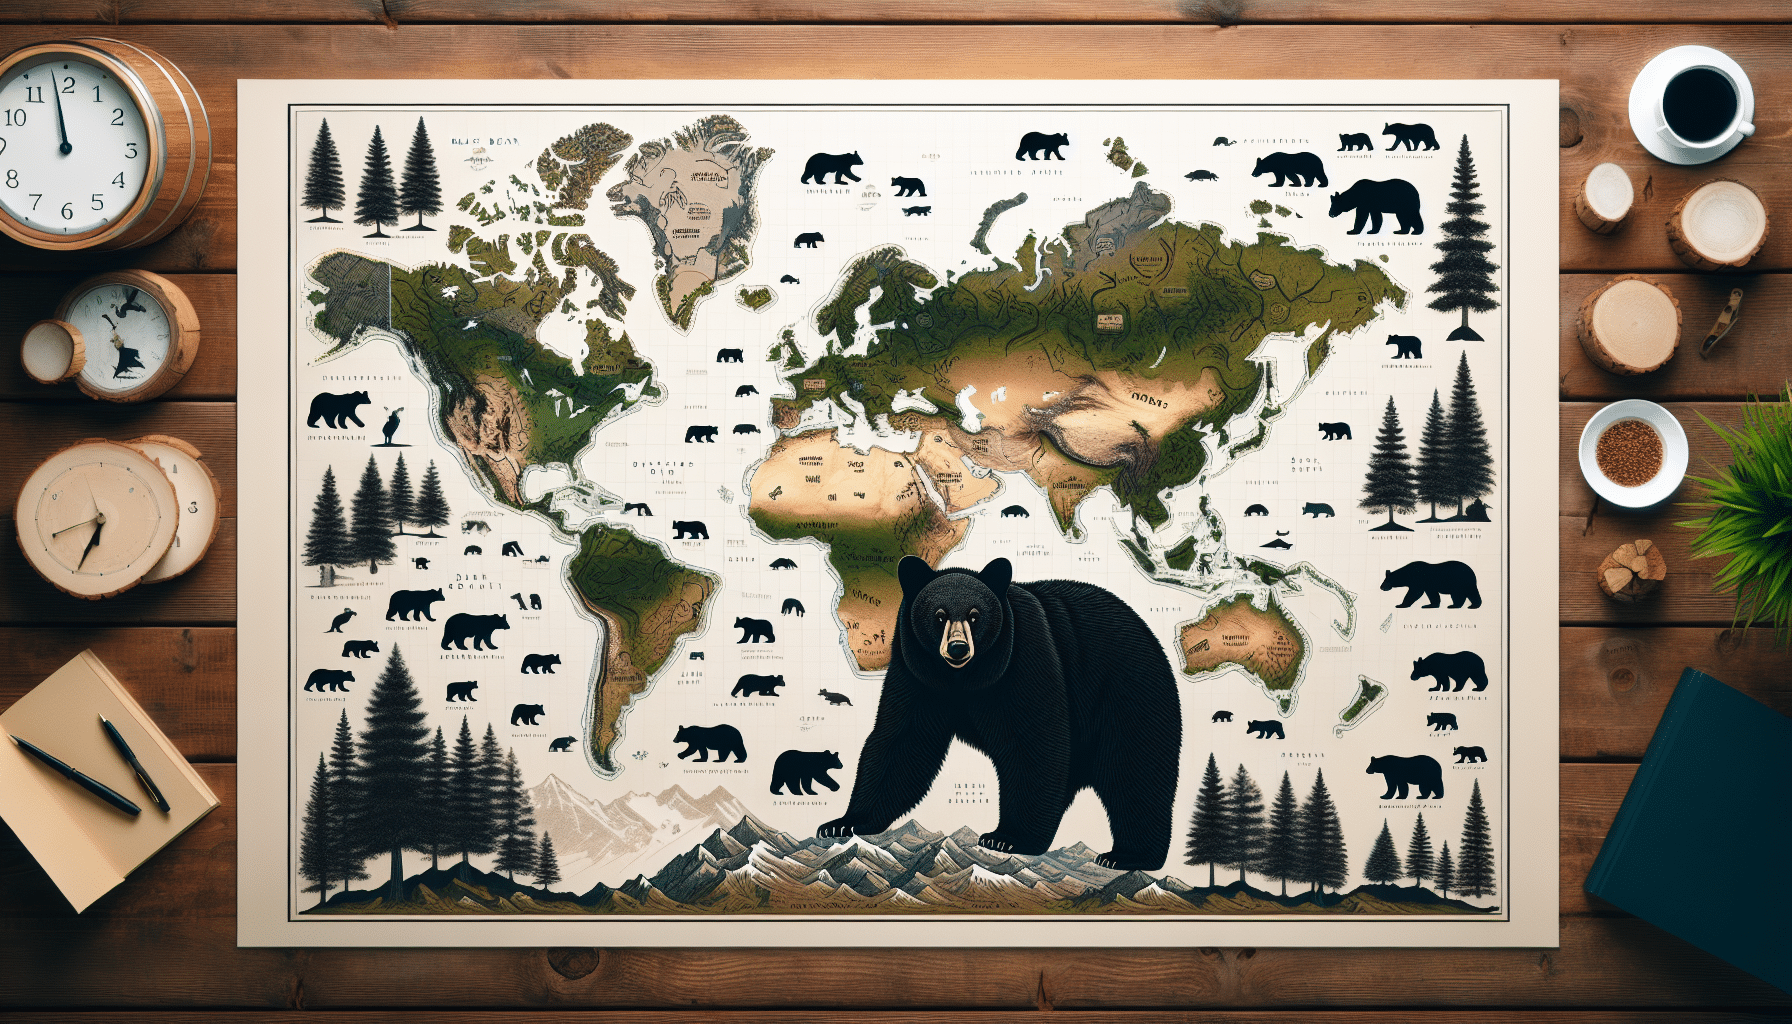 An illustration demonstrating the global distribution of black bears. The image can show various geographical regions where black bears are known to inhabit, indicated by miniature black bear symbols. The setting can encompass various landscapes such as forests, mountains, and coasts to represent regions. Ensure that the image is devoid of any human presence, text or brand names. The artwork should capture the essence of black bear habitats and biomes.